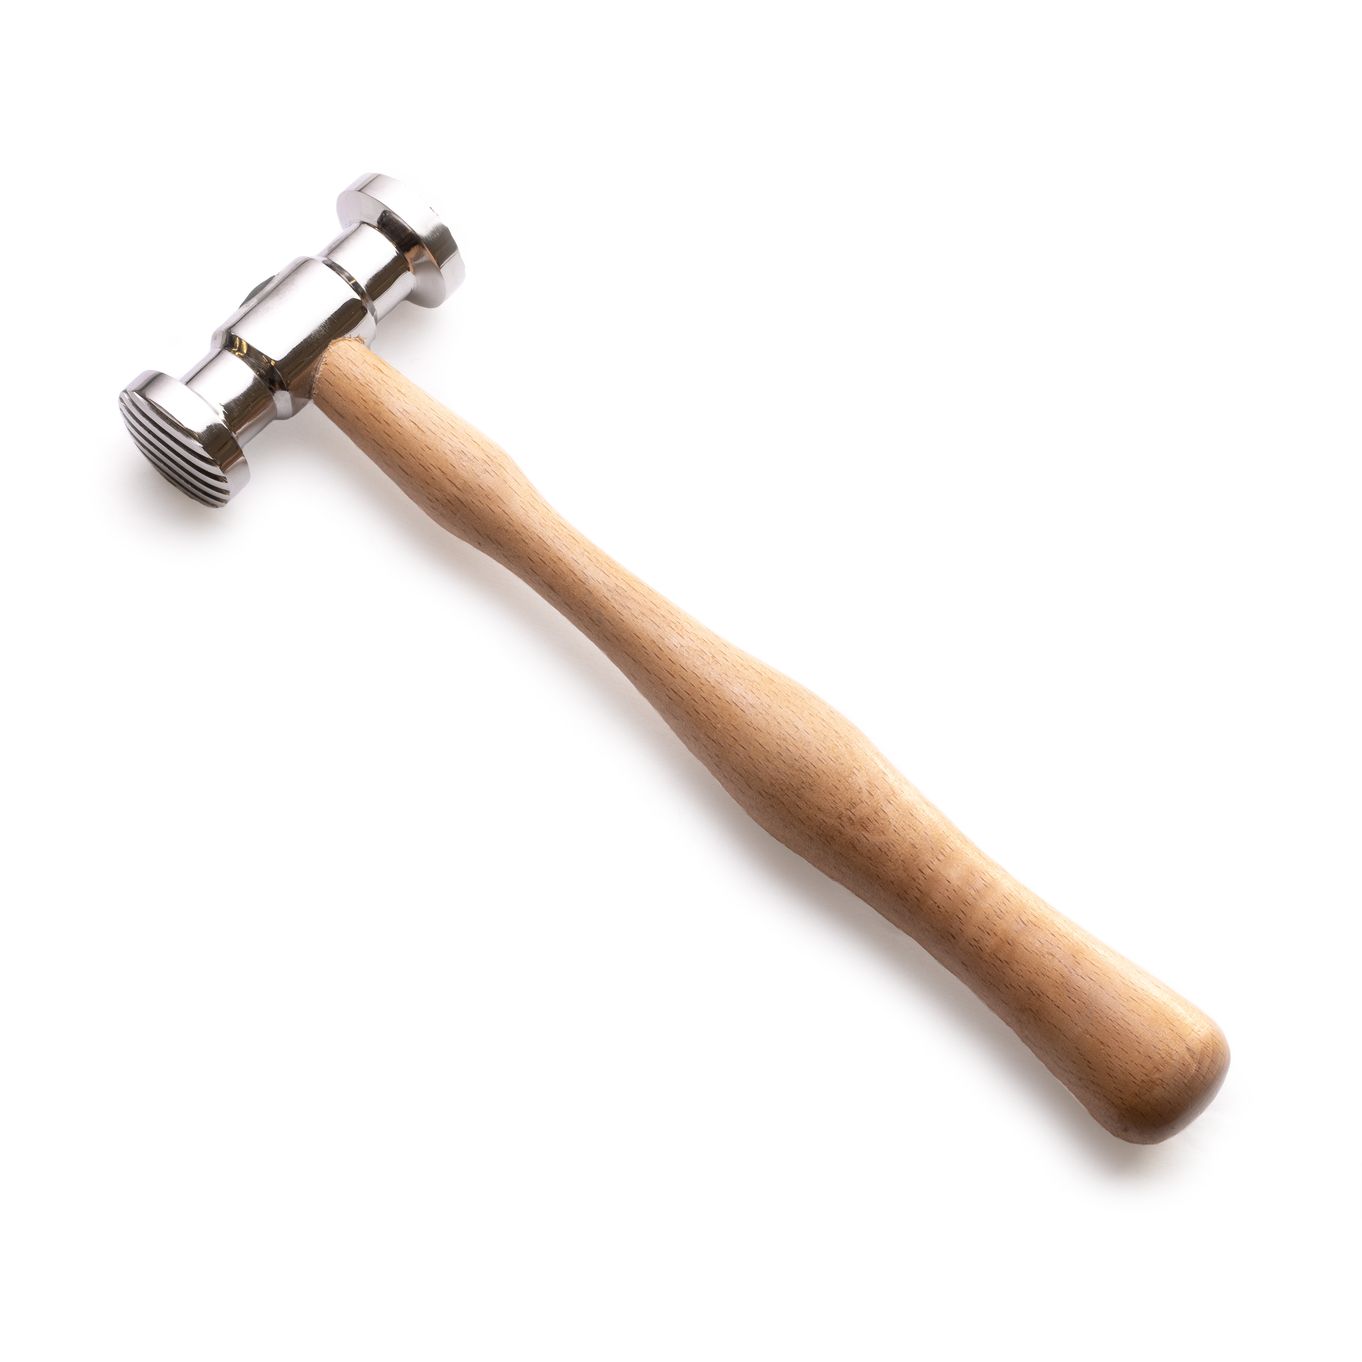 Premium Rawhide Mallet Hammer for Jewelry or Metal 6 oz. - Hammers, Mallet